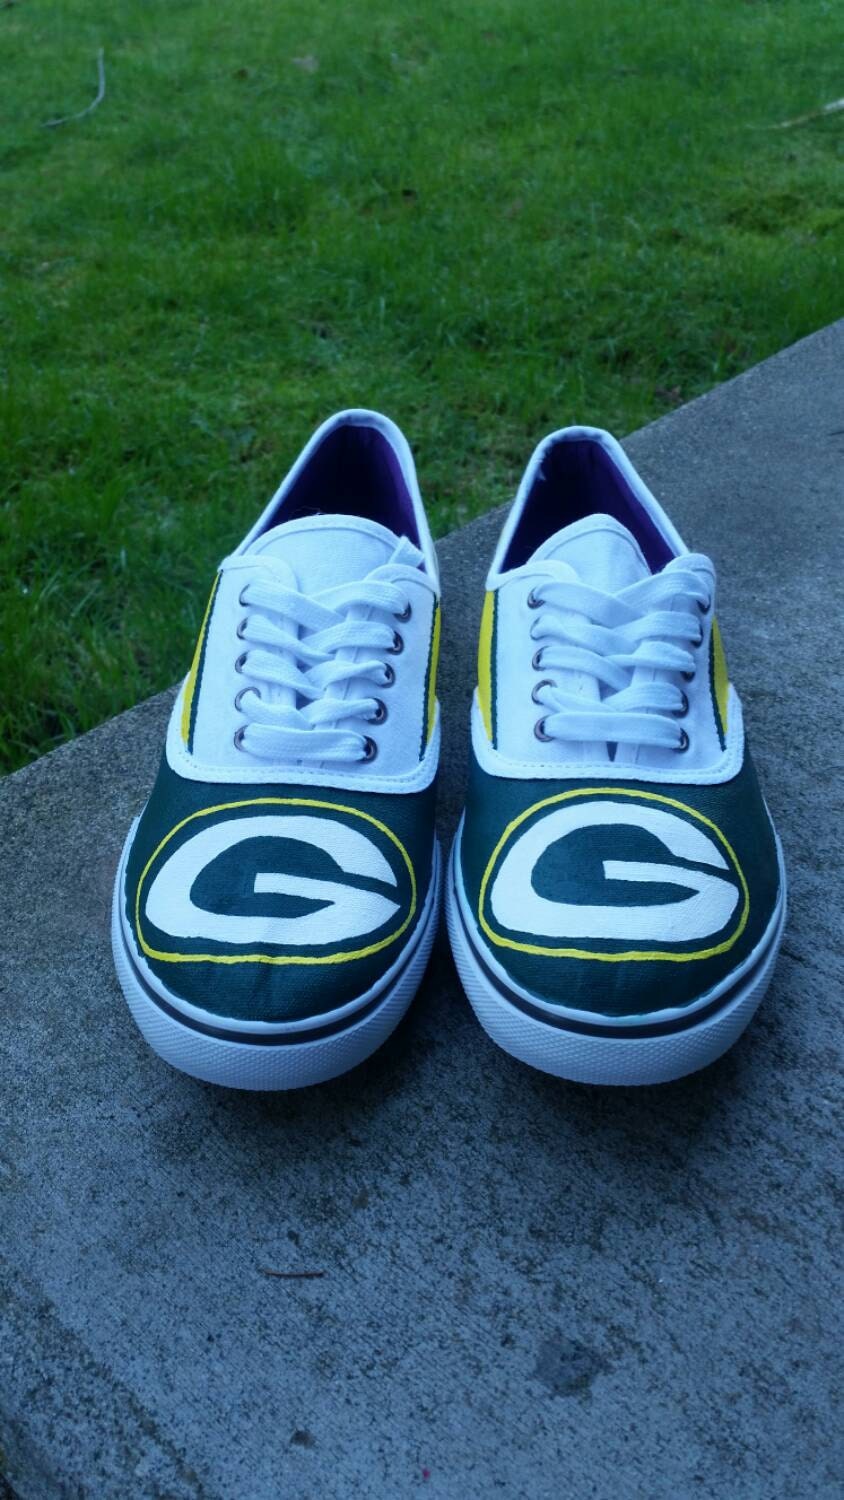 Green Bay Packer Shoes by CustomColors425 on Etsy